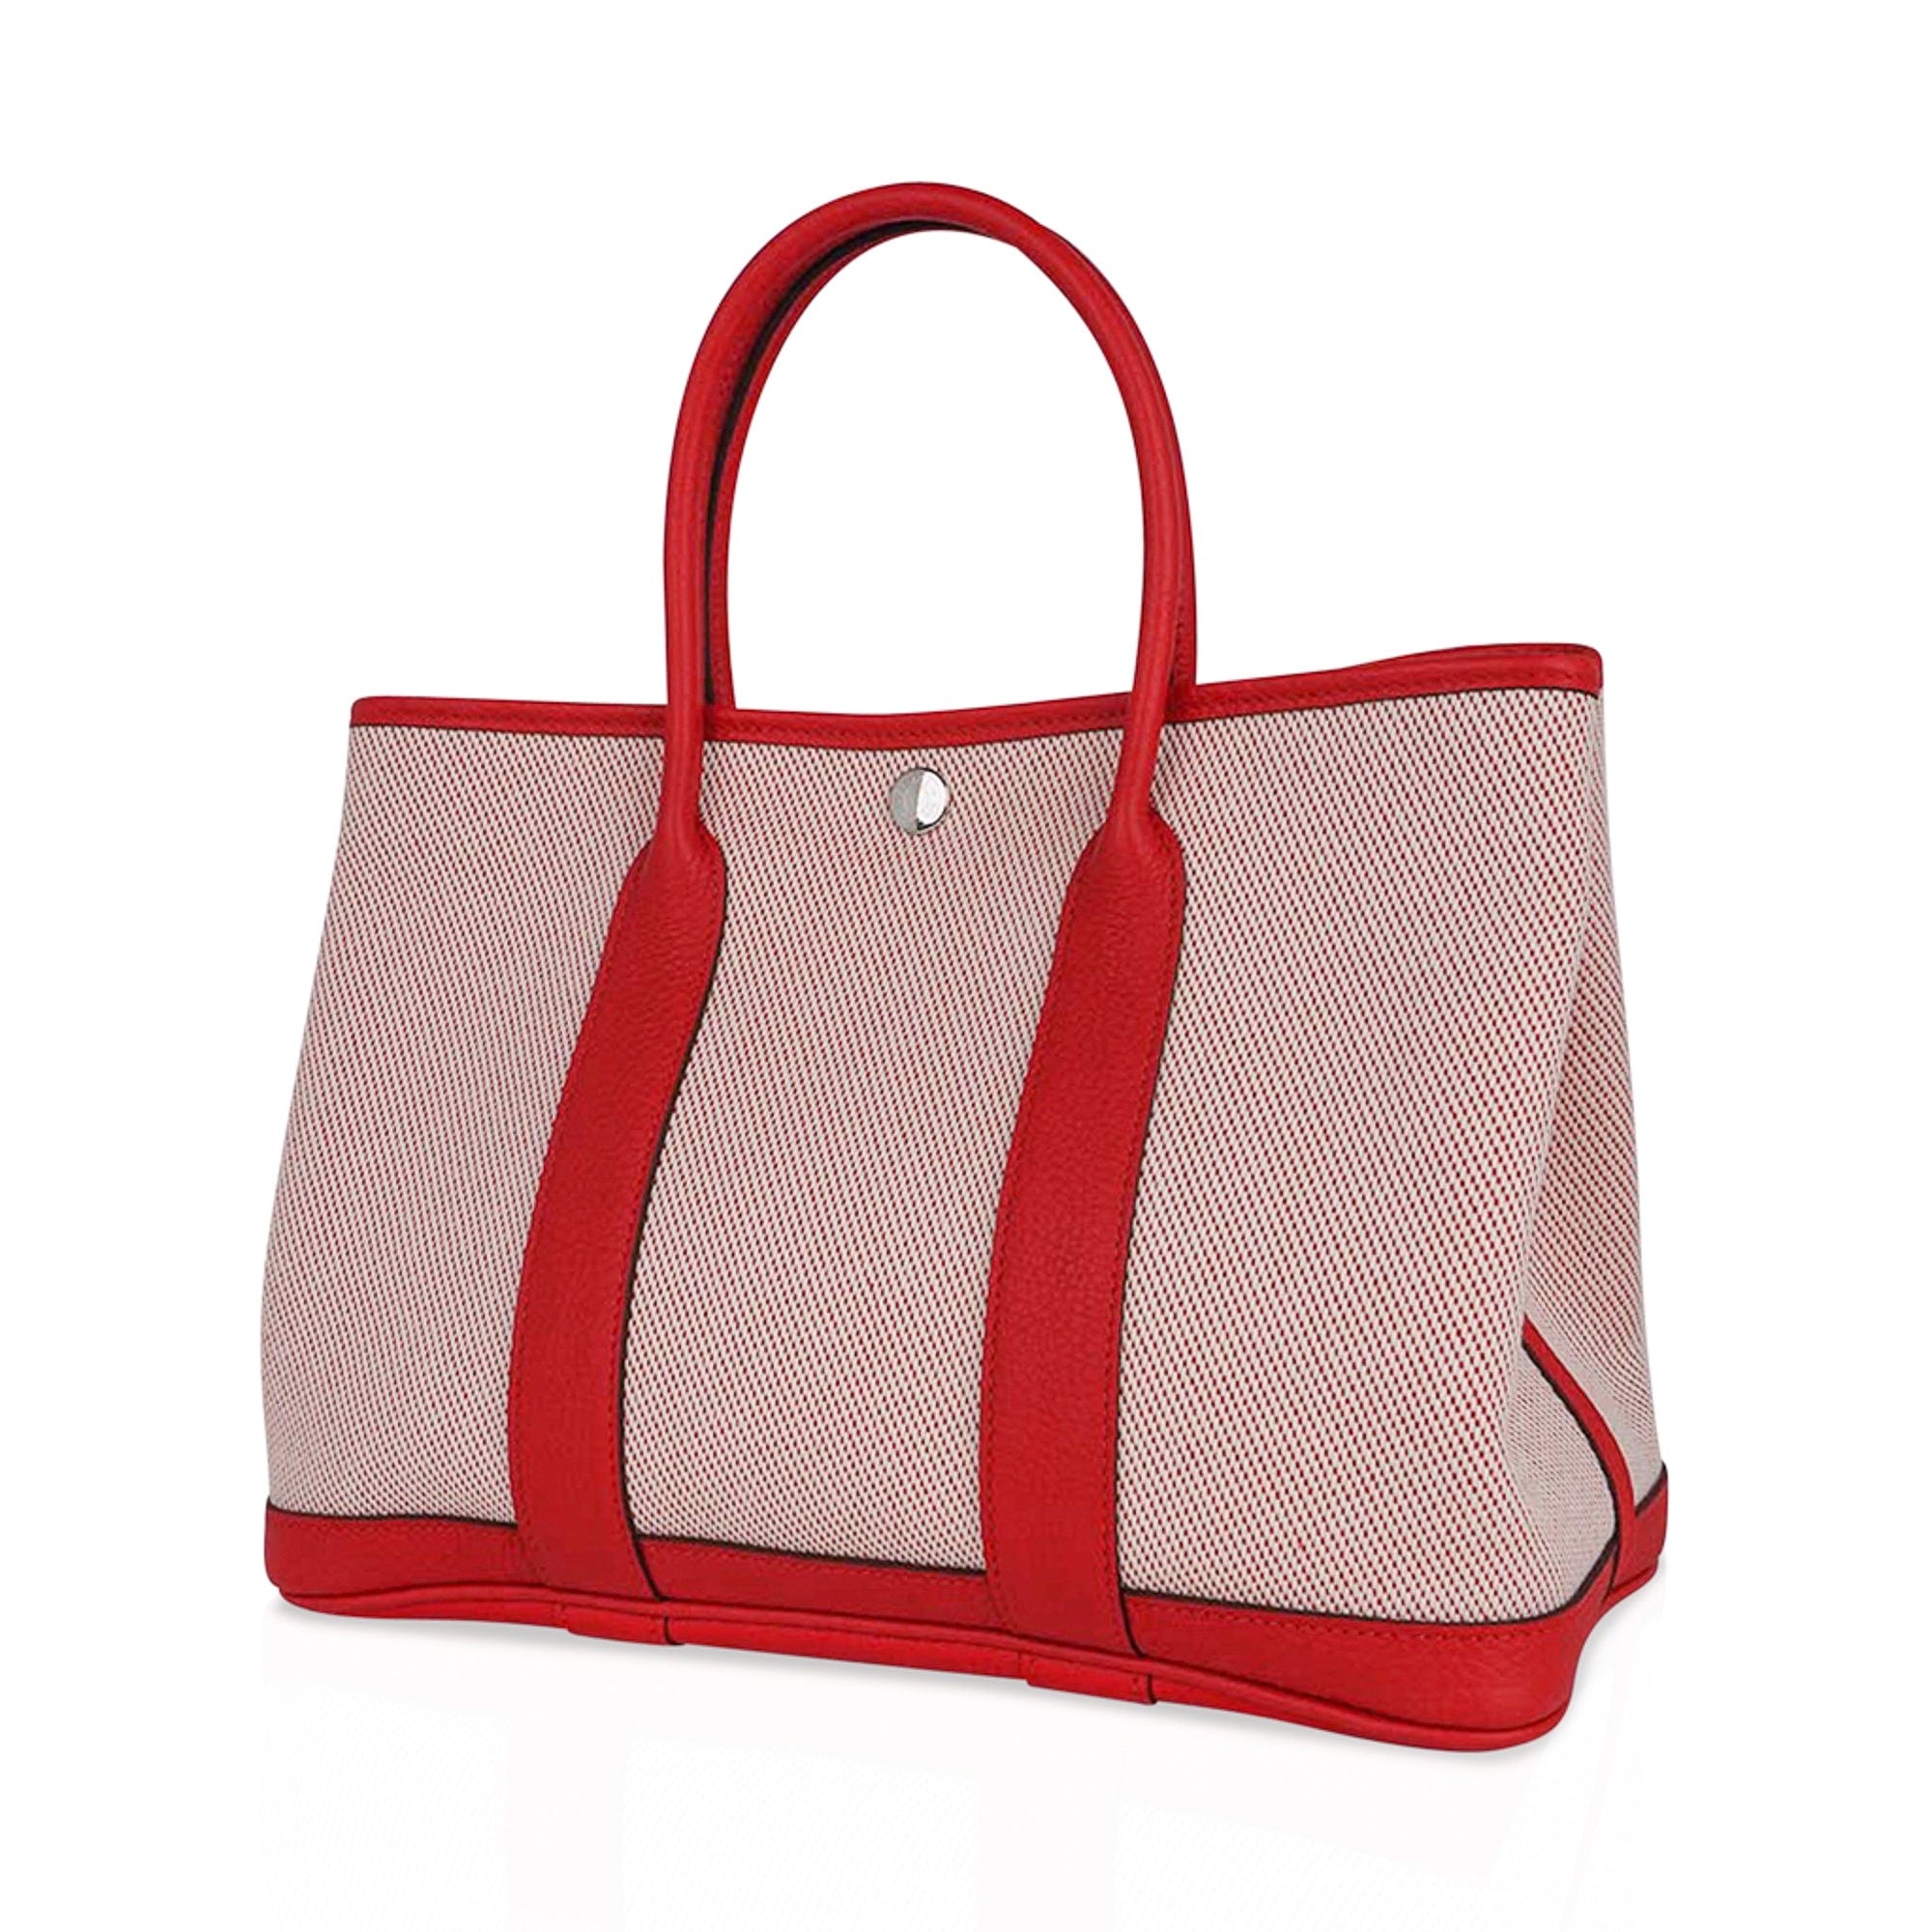 HERMES Garden Party PM Leather Tote Handbag Pink